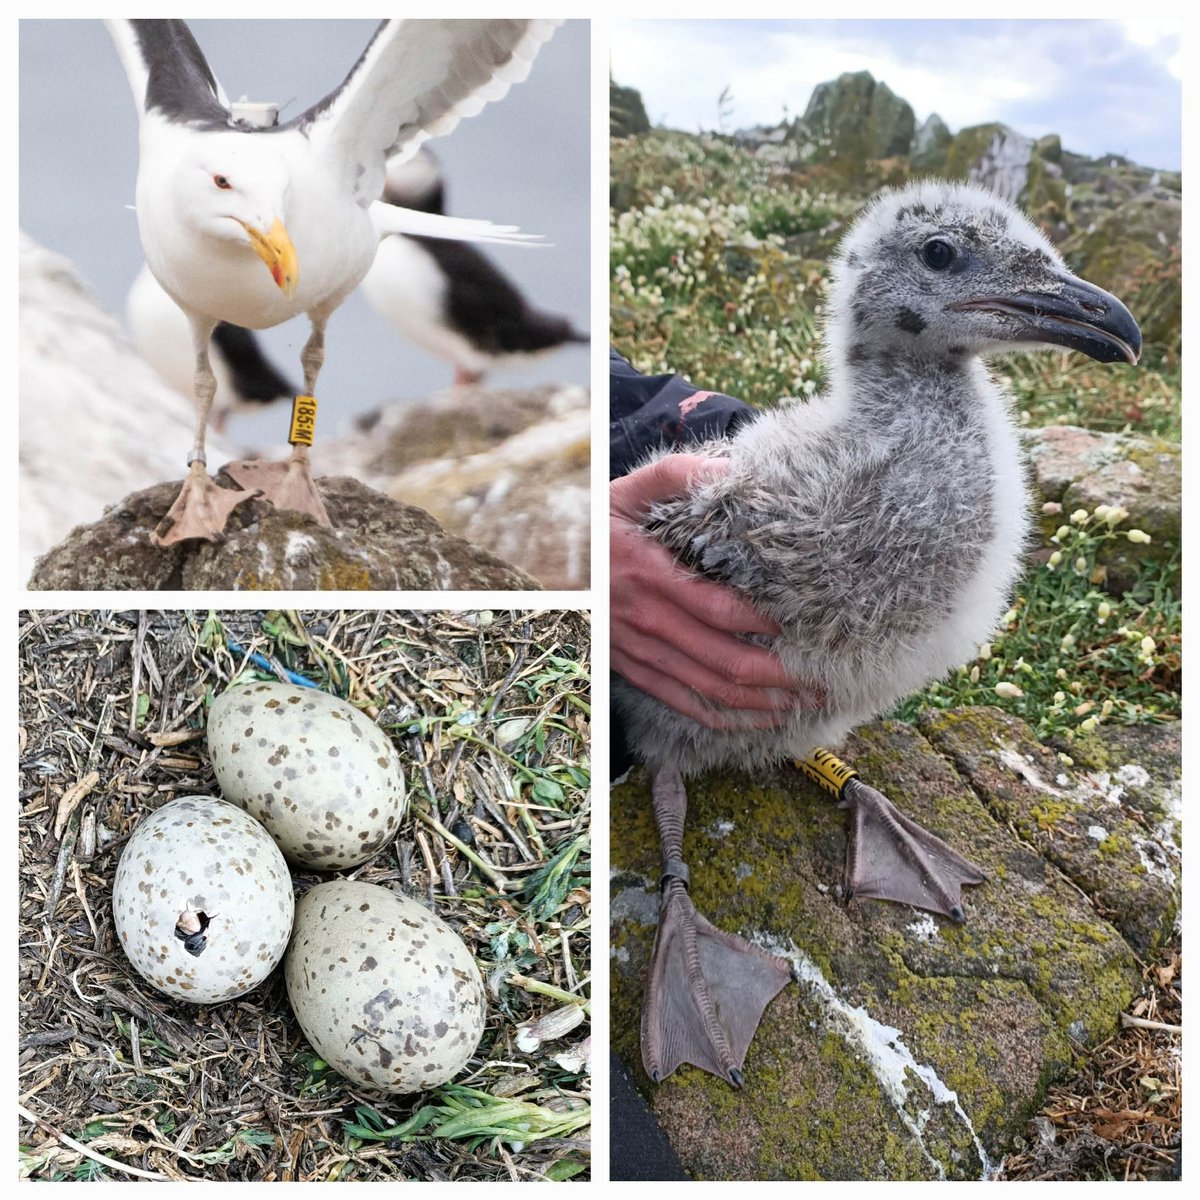 🚨New paper in @IBIS_journal!🚨 One for all the #seabirders and movement ecologists. We report negative impacts on the breeding performance of Great Black-backed Gulls from harness-mounted GPS devices. #ornithology
Link: tinyurl.com/uewjfa84